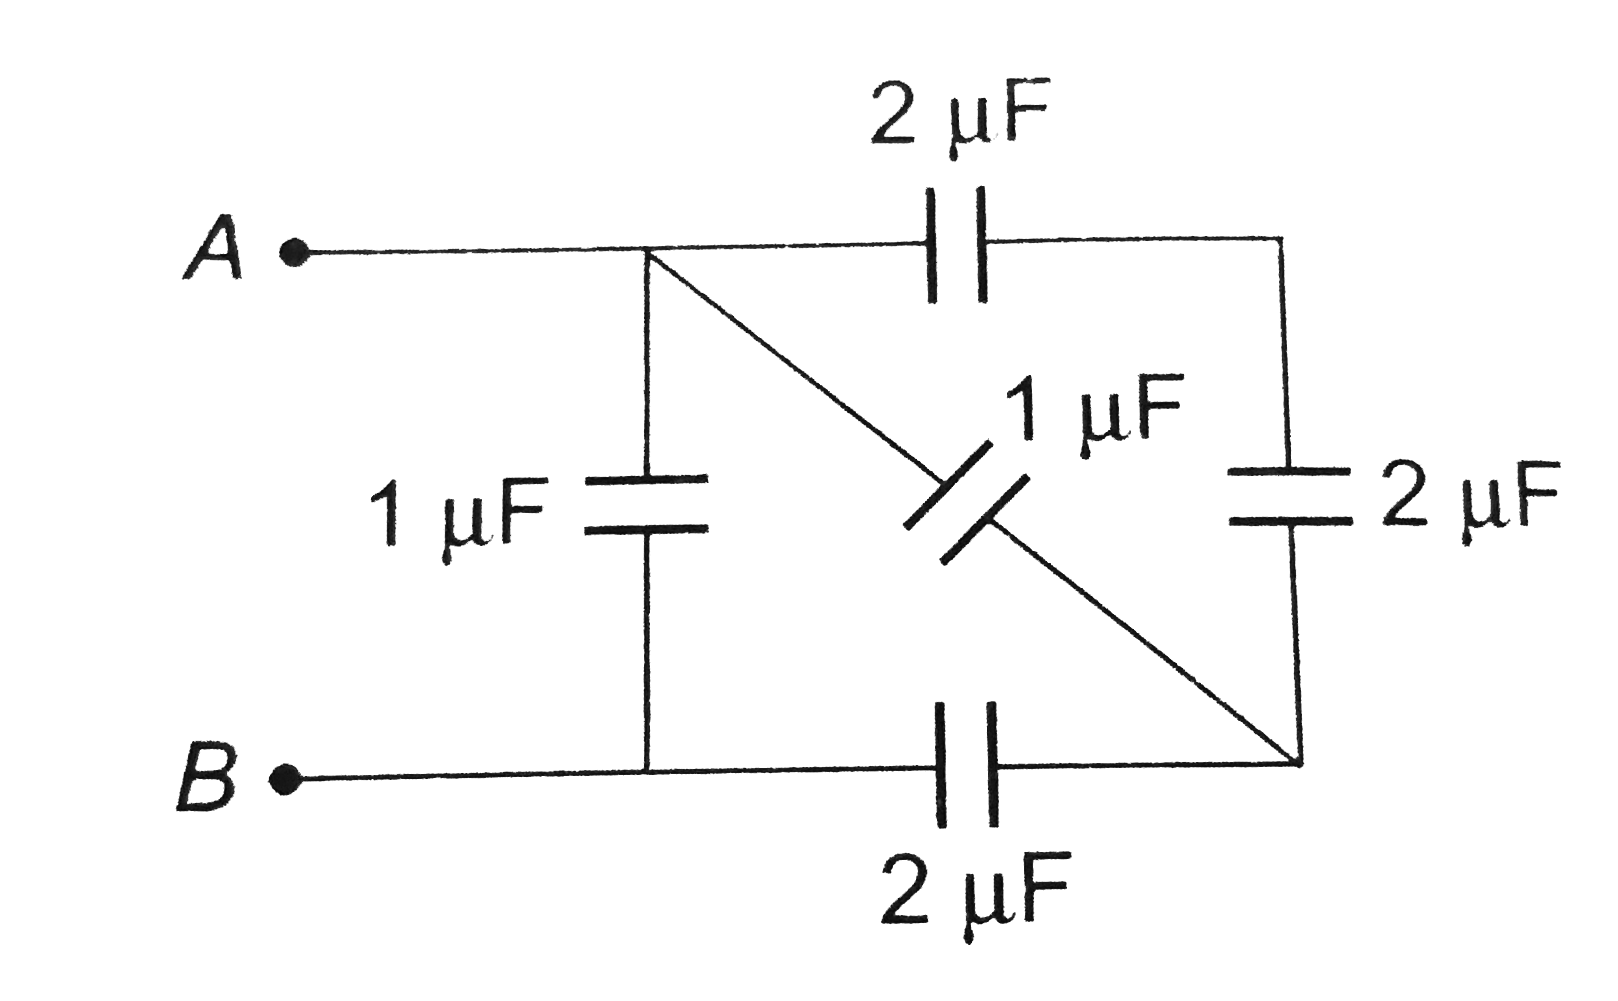 The total capacity of the system of capacitors shown in the adjoining figure between the points A and B is